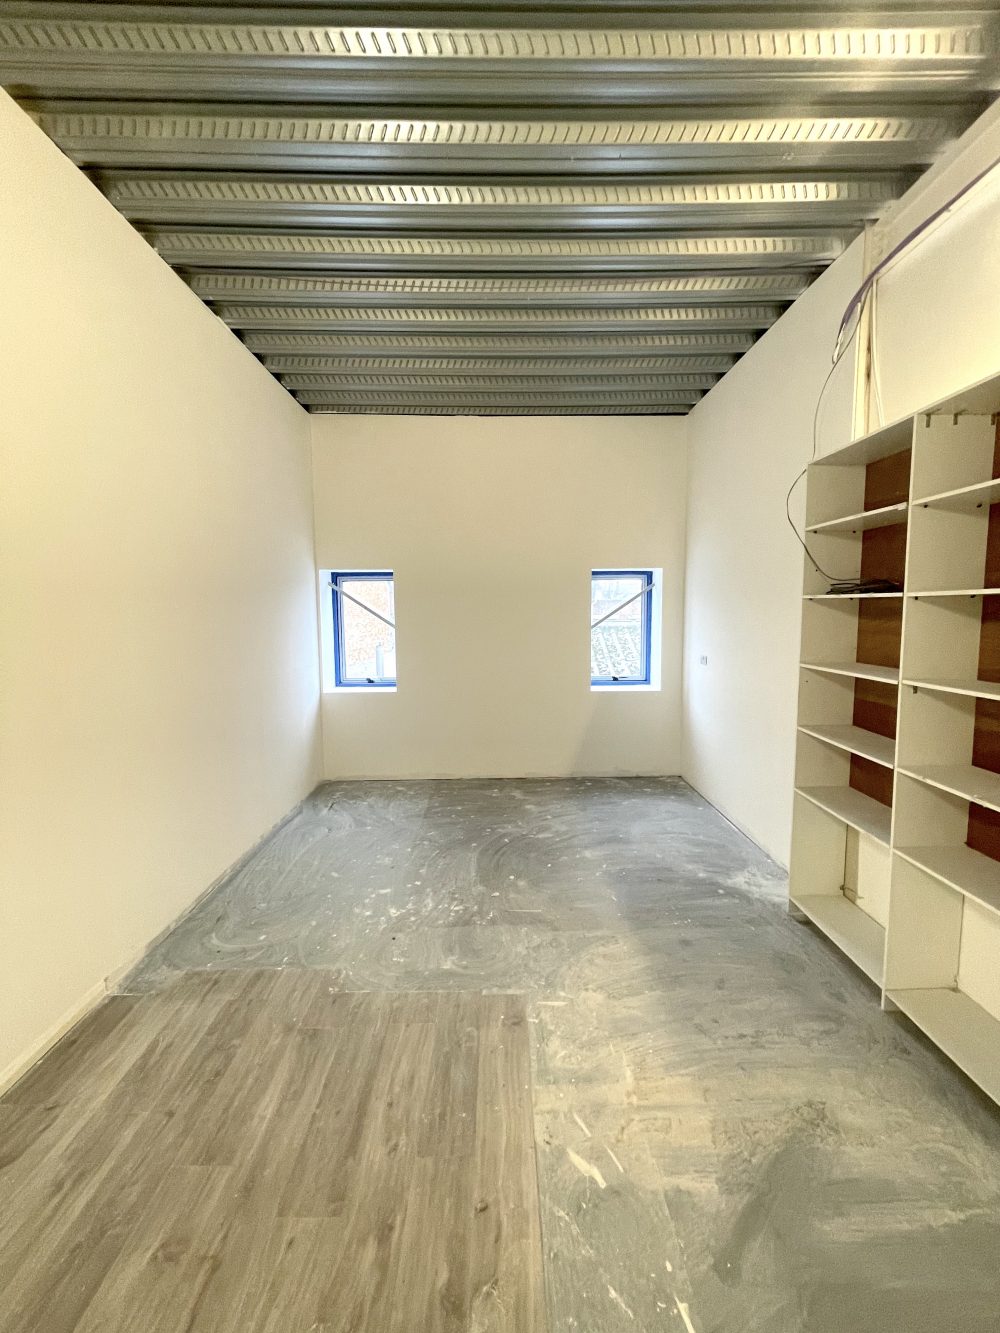 First floor office space : light idustrial creative artist studio to rent in E18 S South Woodford Pic 14